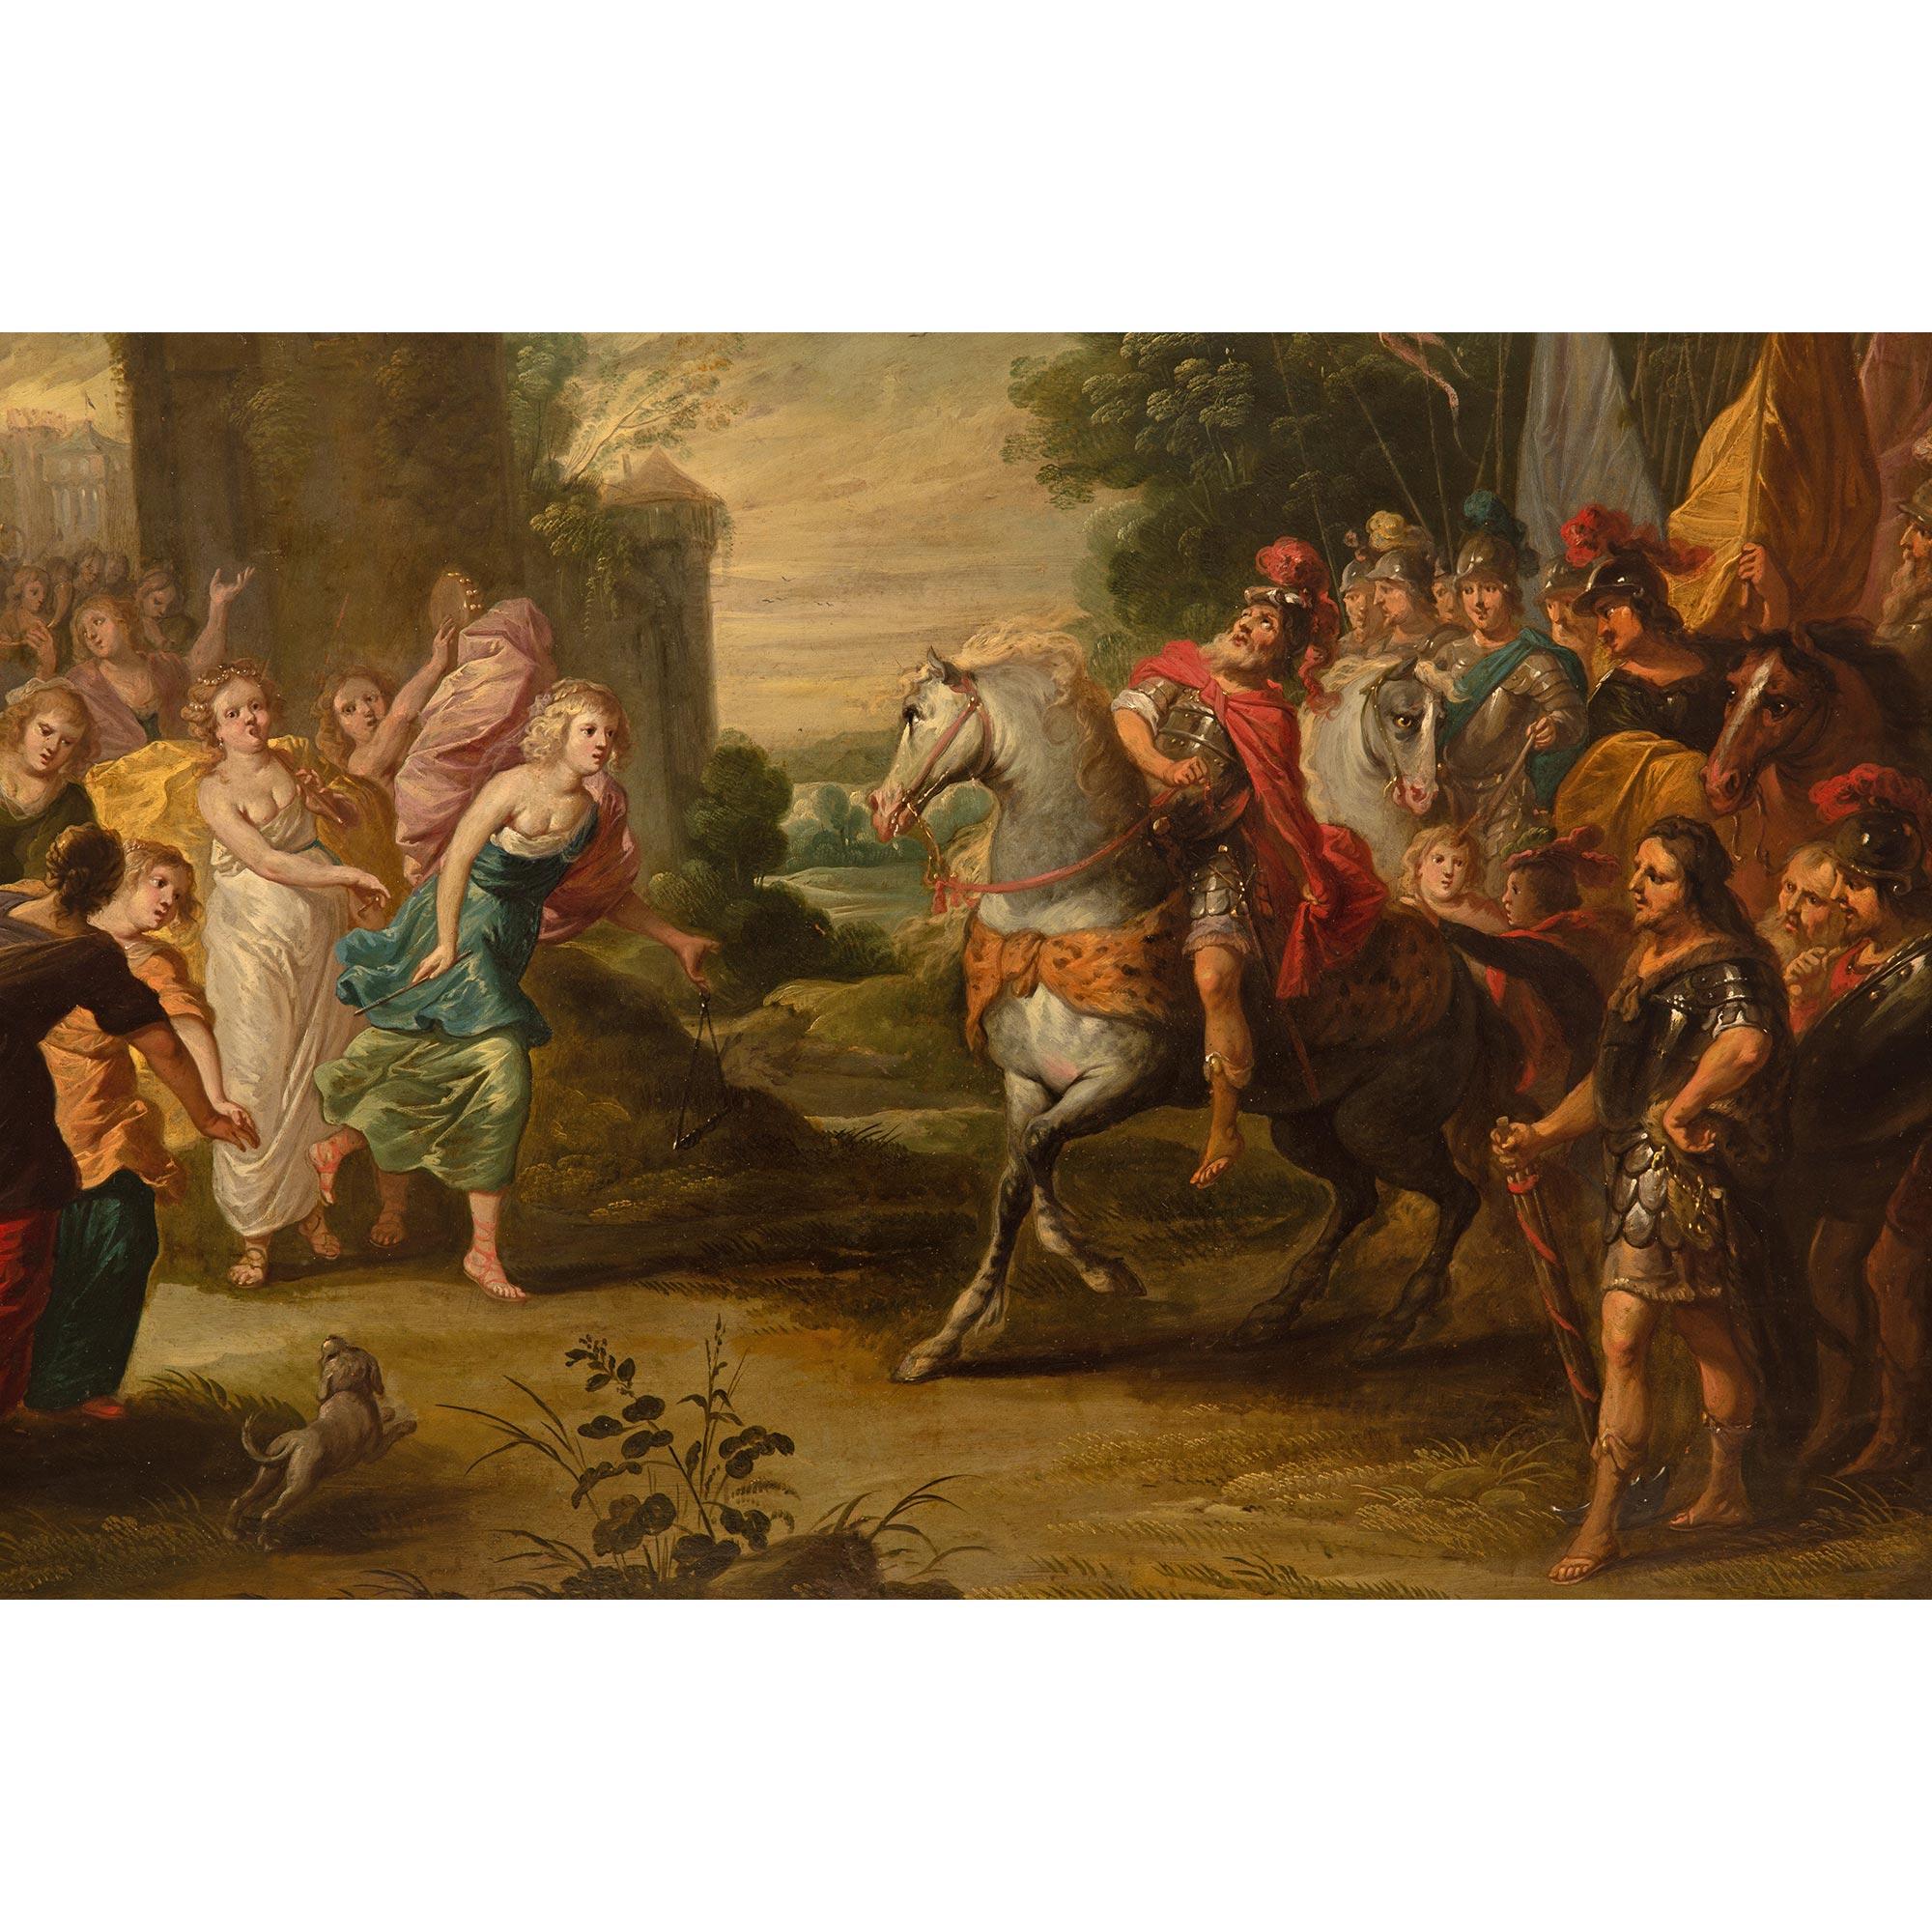 Flemish Late 17th Century/Early 18th Century Oil on Canvas Painting In Good Condition For Sale In West Palm Beach, FL